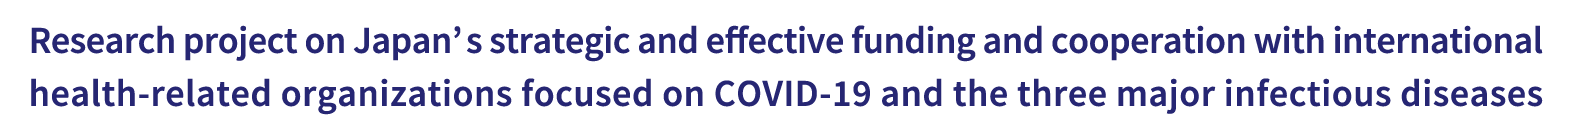 Research project on Japan’s strategic and effective funding and cooperation with international health-related organizations focused on COVID-19 and the three major infectious diseases